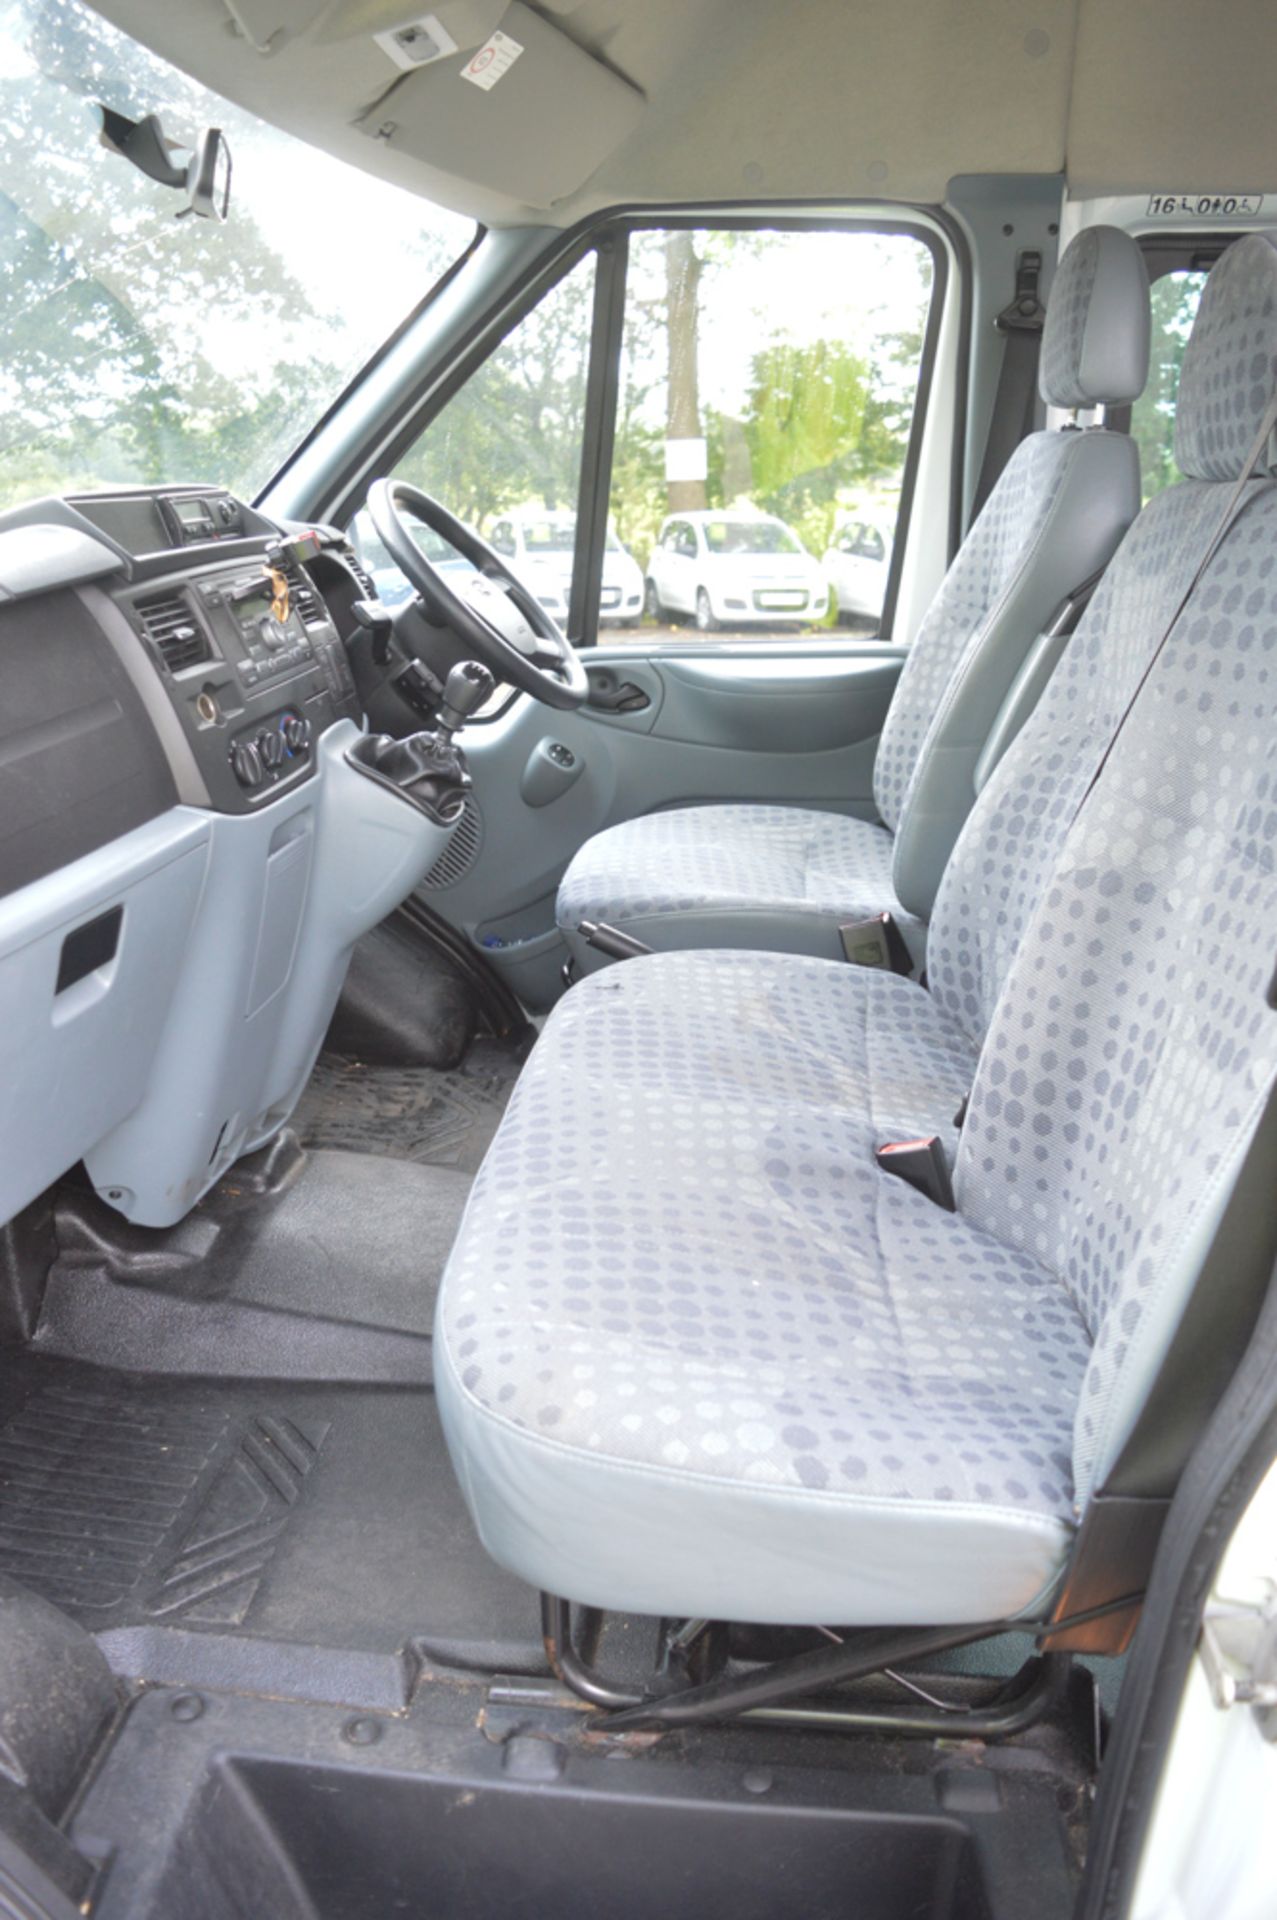 Ford Transit 135 T430 RWD 16 seat minibus  Registration Number: YT12 CXE Date of Registration: - Image 10 of 11